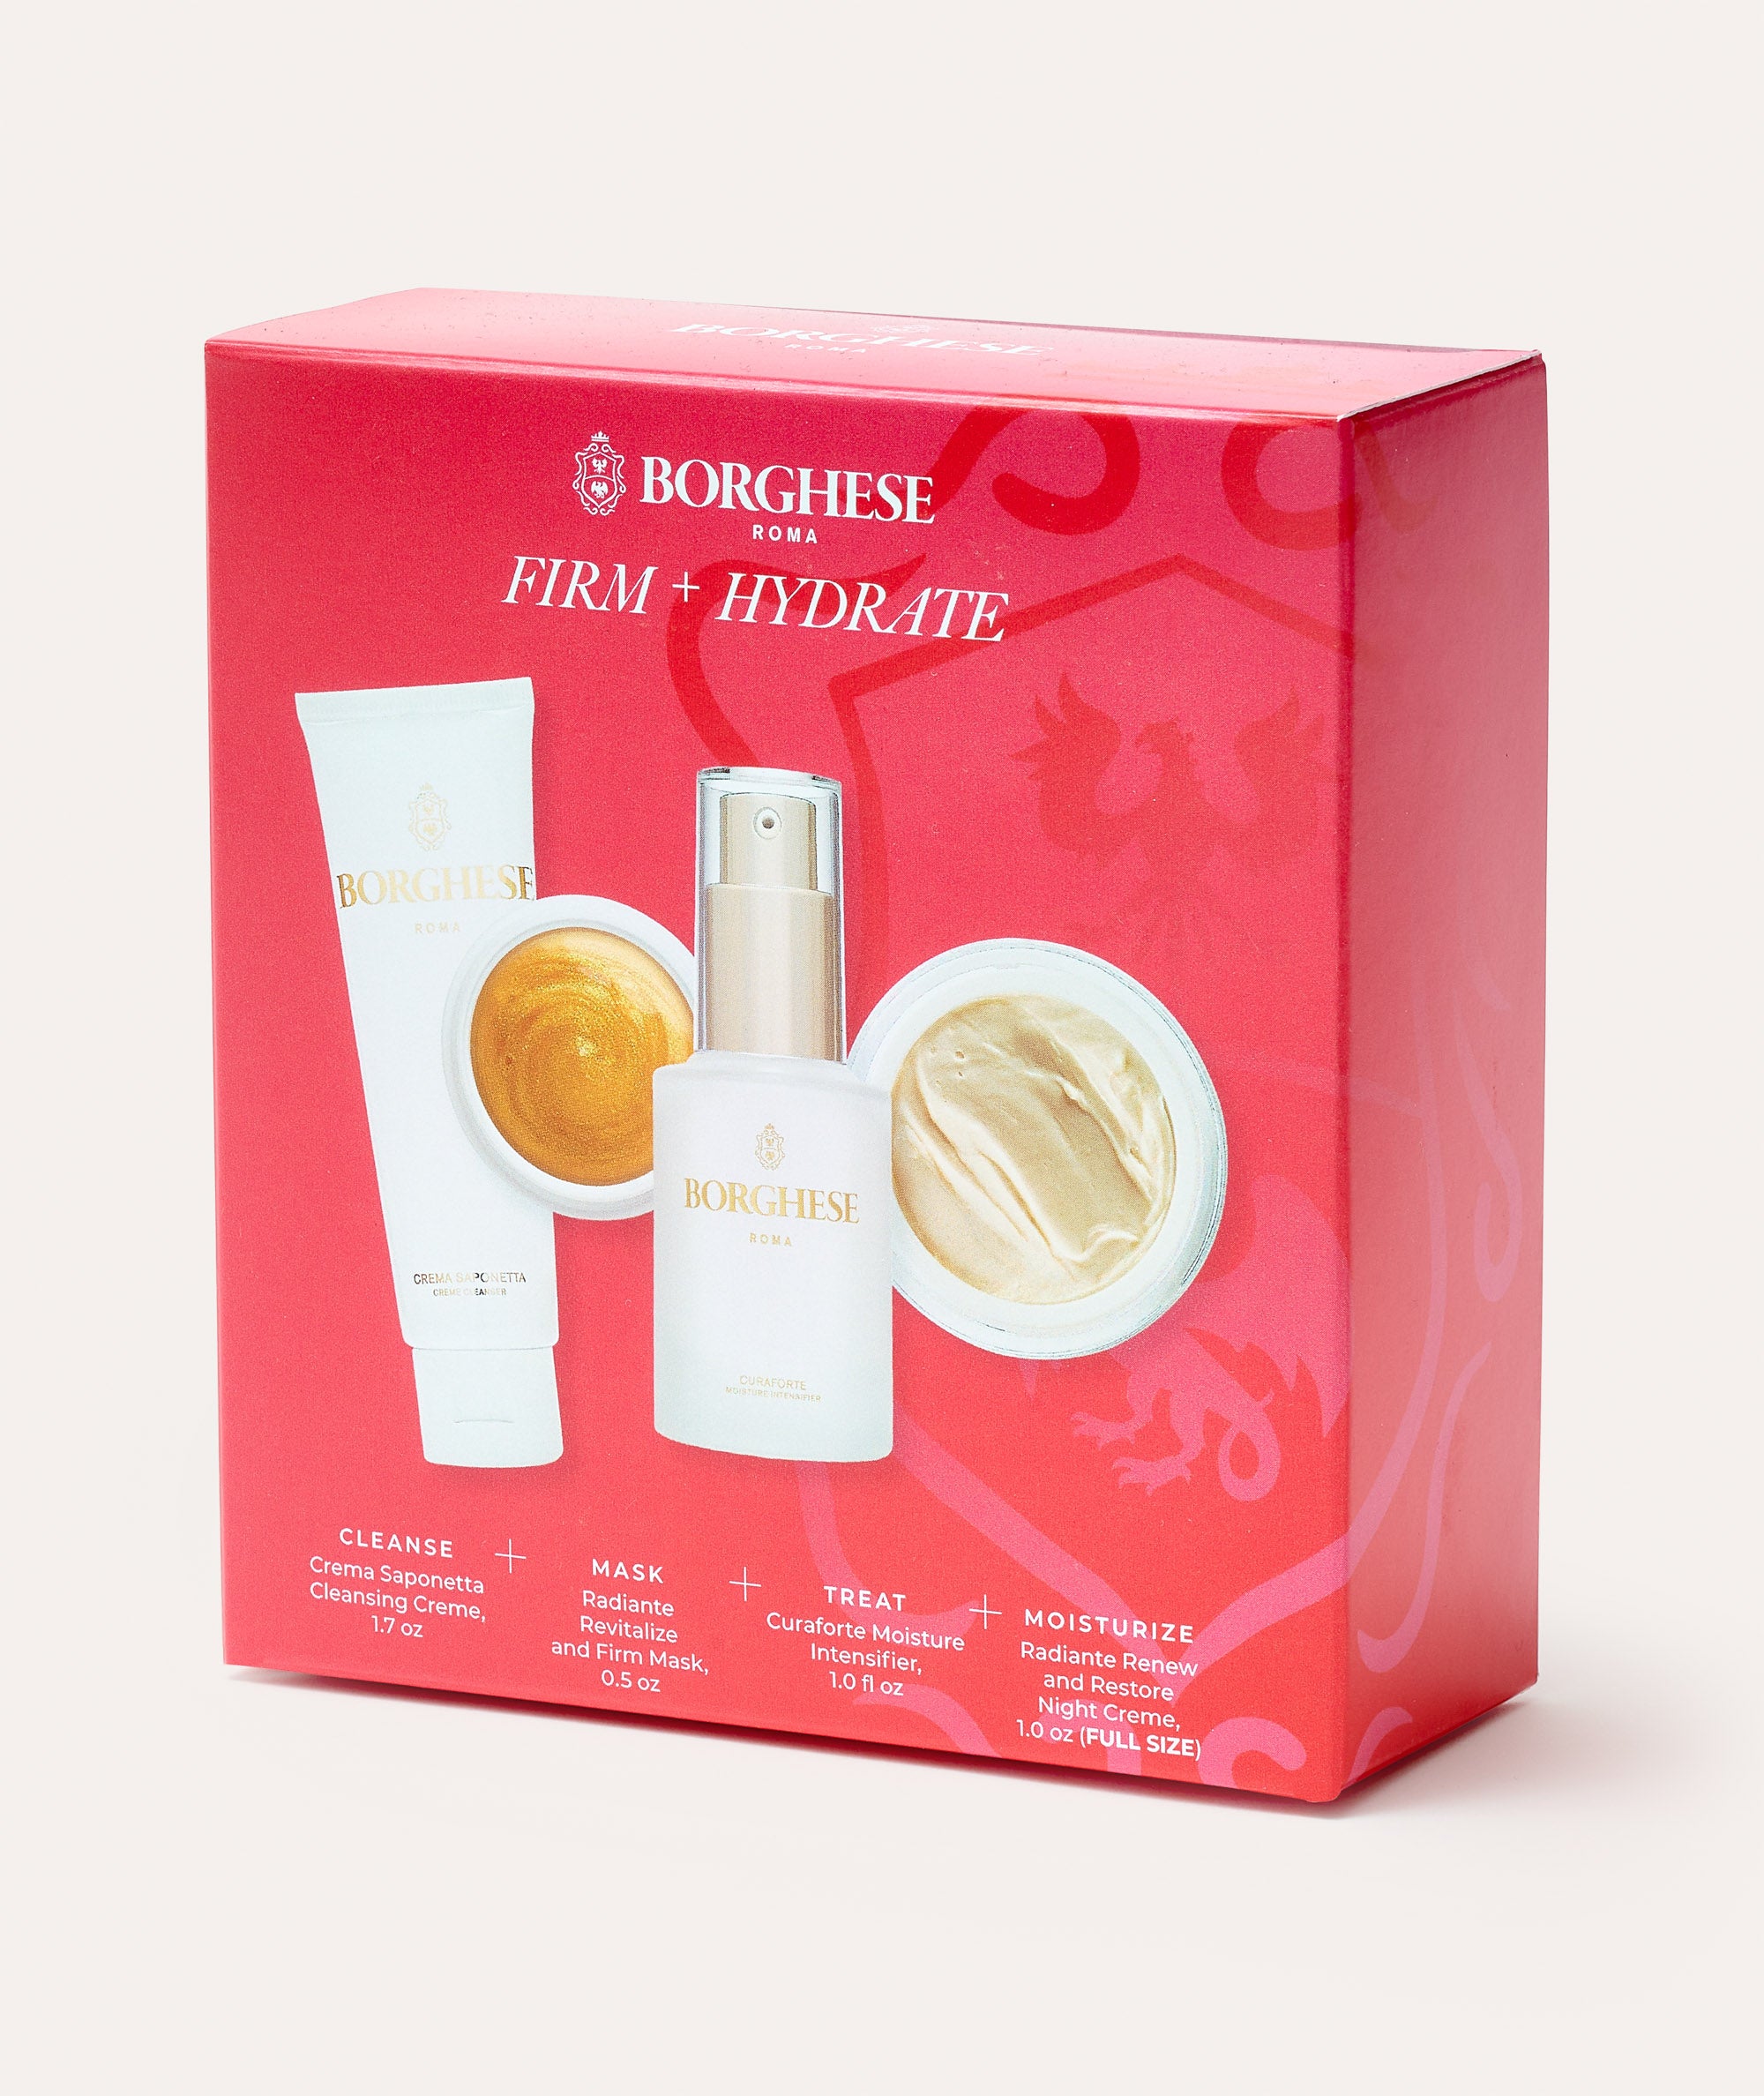 The Borghese 4-Piece Firm & Hydrate Gift Set red box